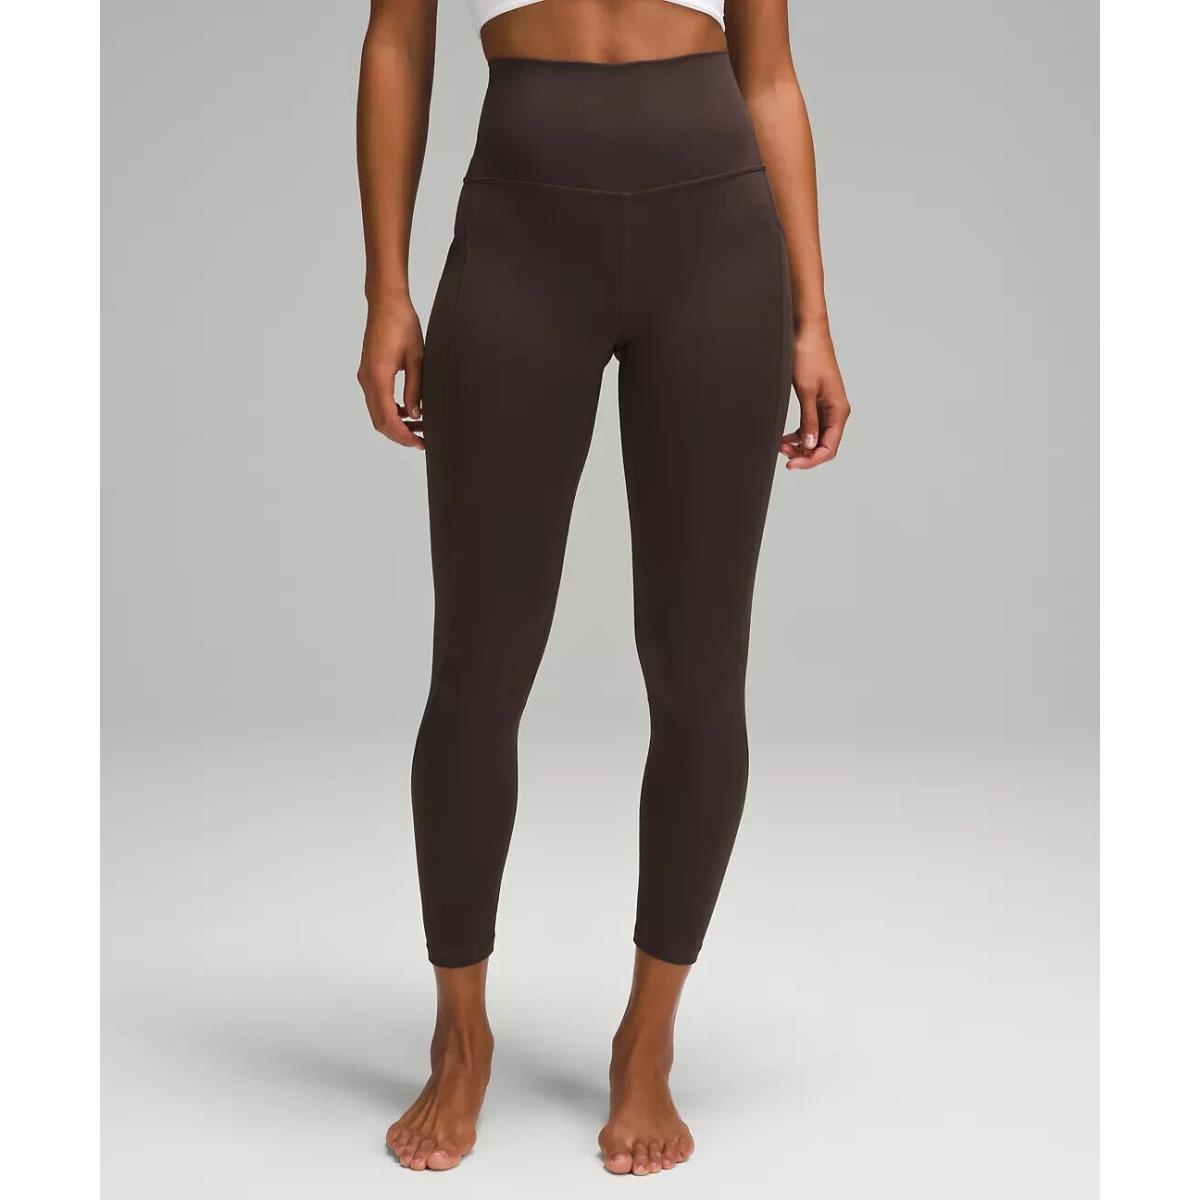 Lululemon Align High-rise Pant with Pockets 25 Espresso Size 0